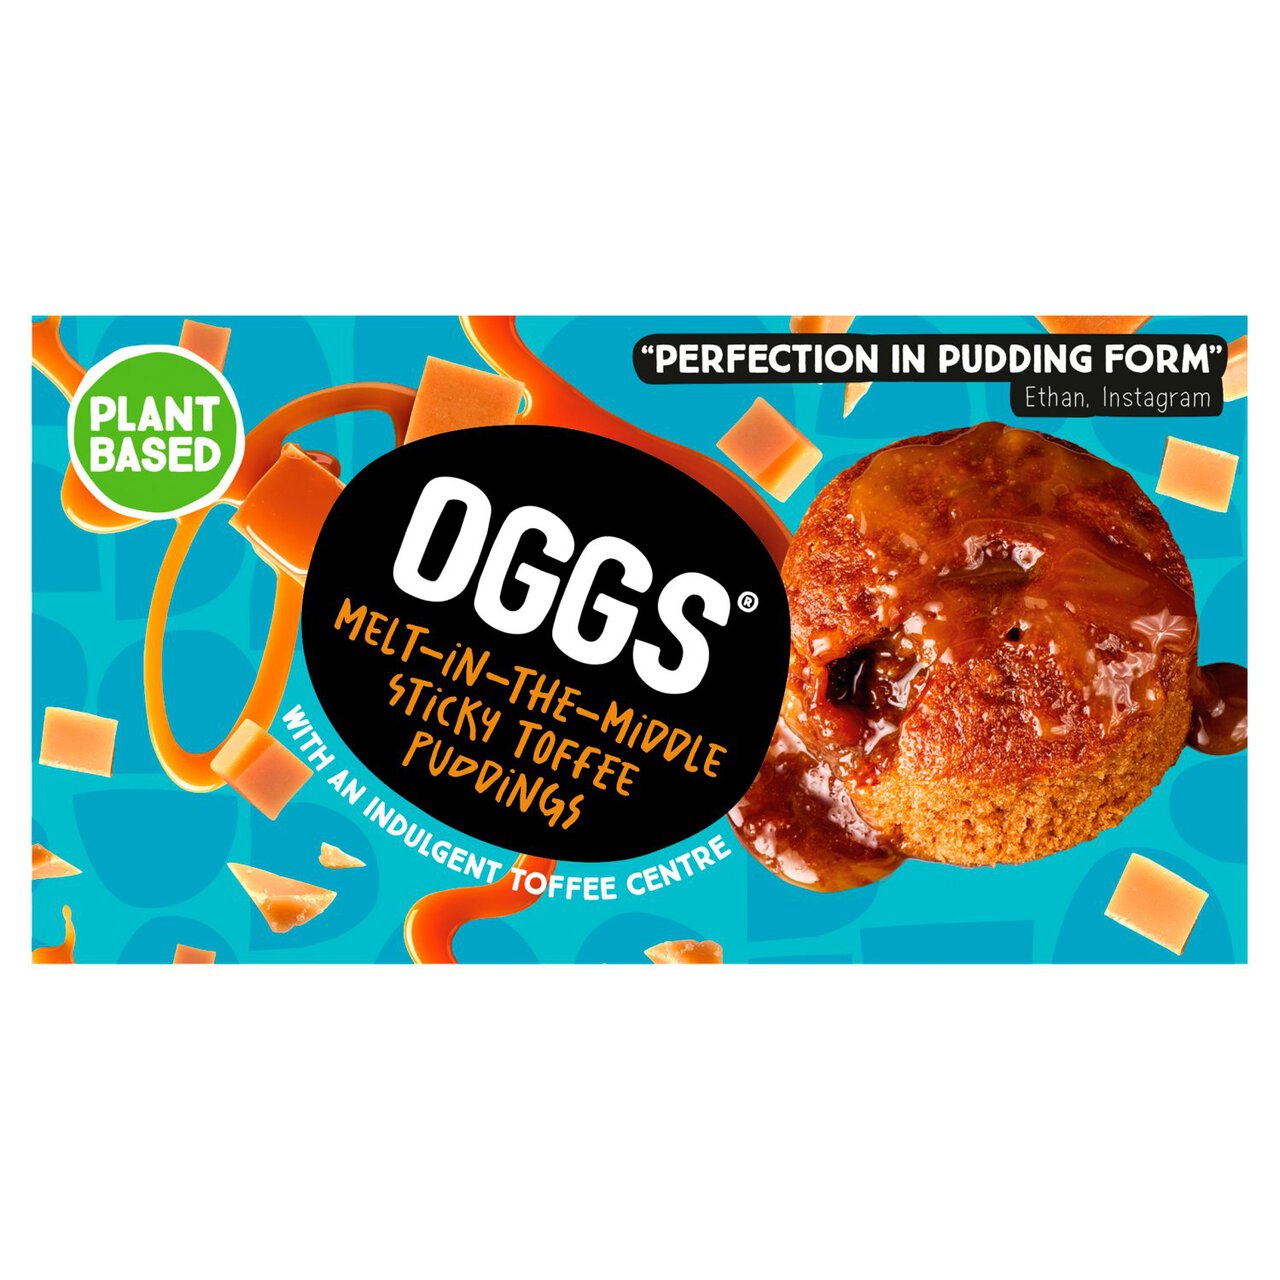 OGGS Vegan Sticky Toffee Puddings 2 x 80g